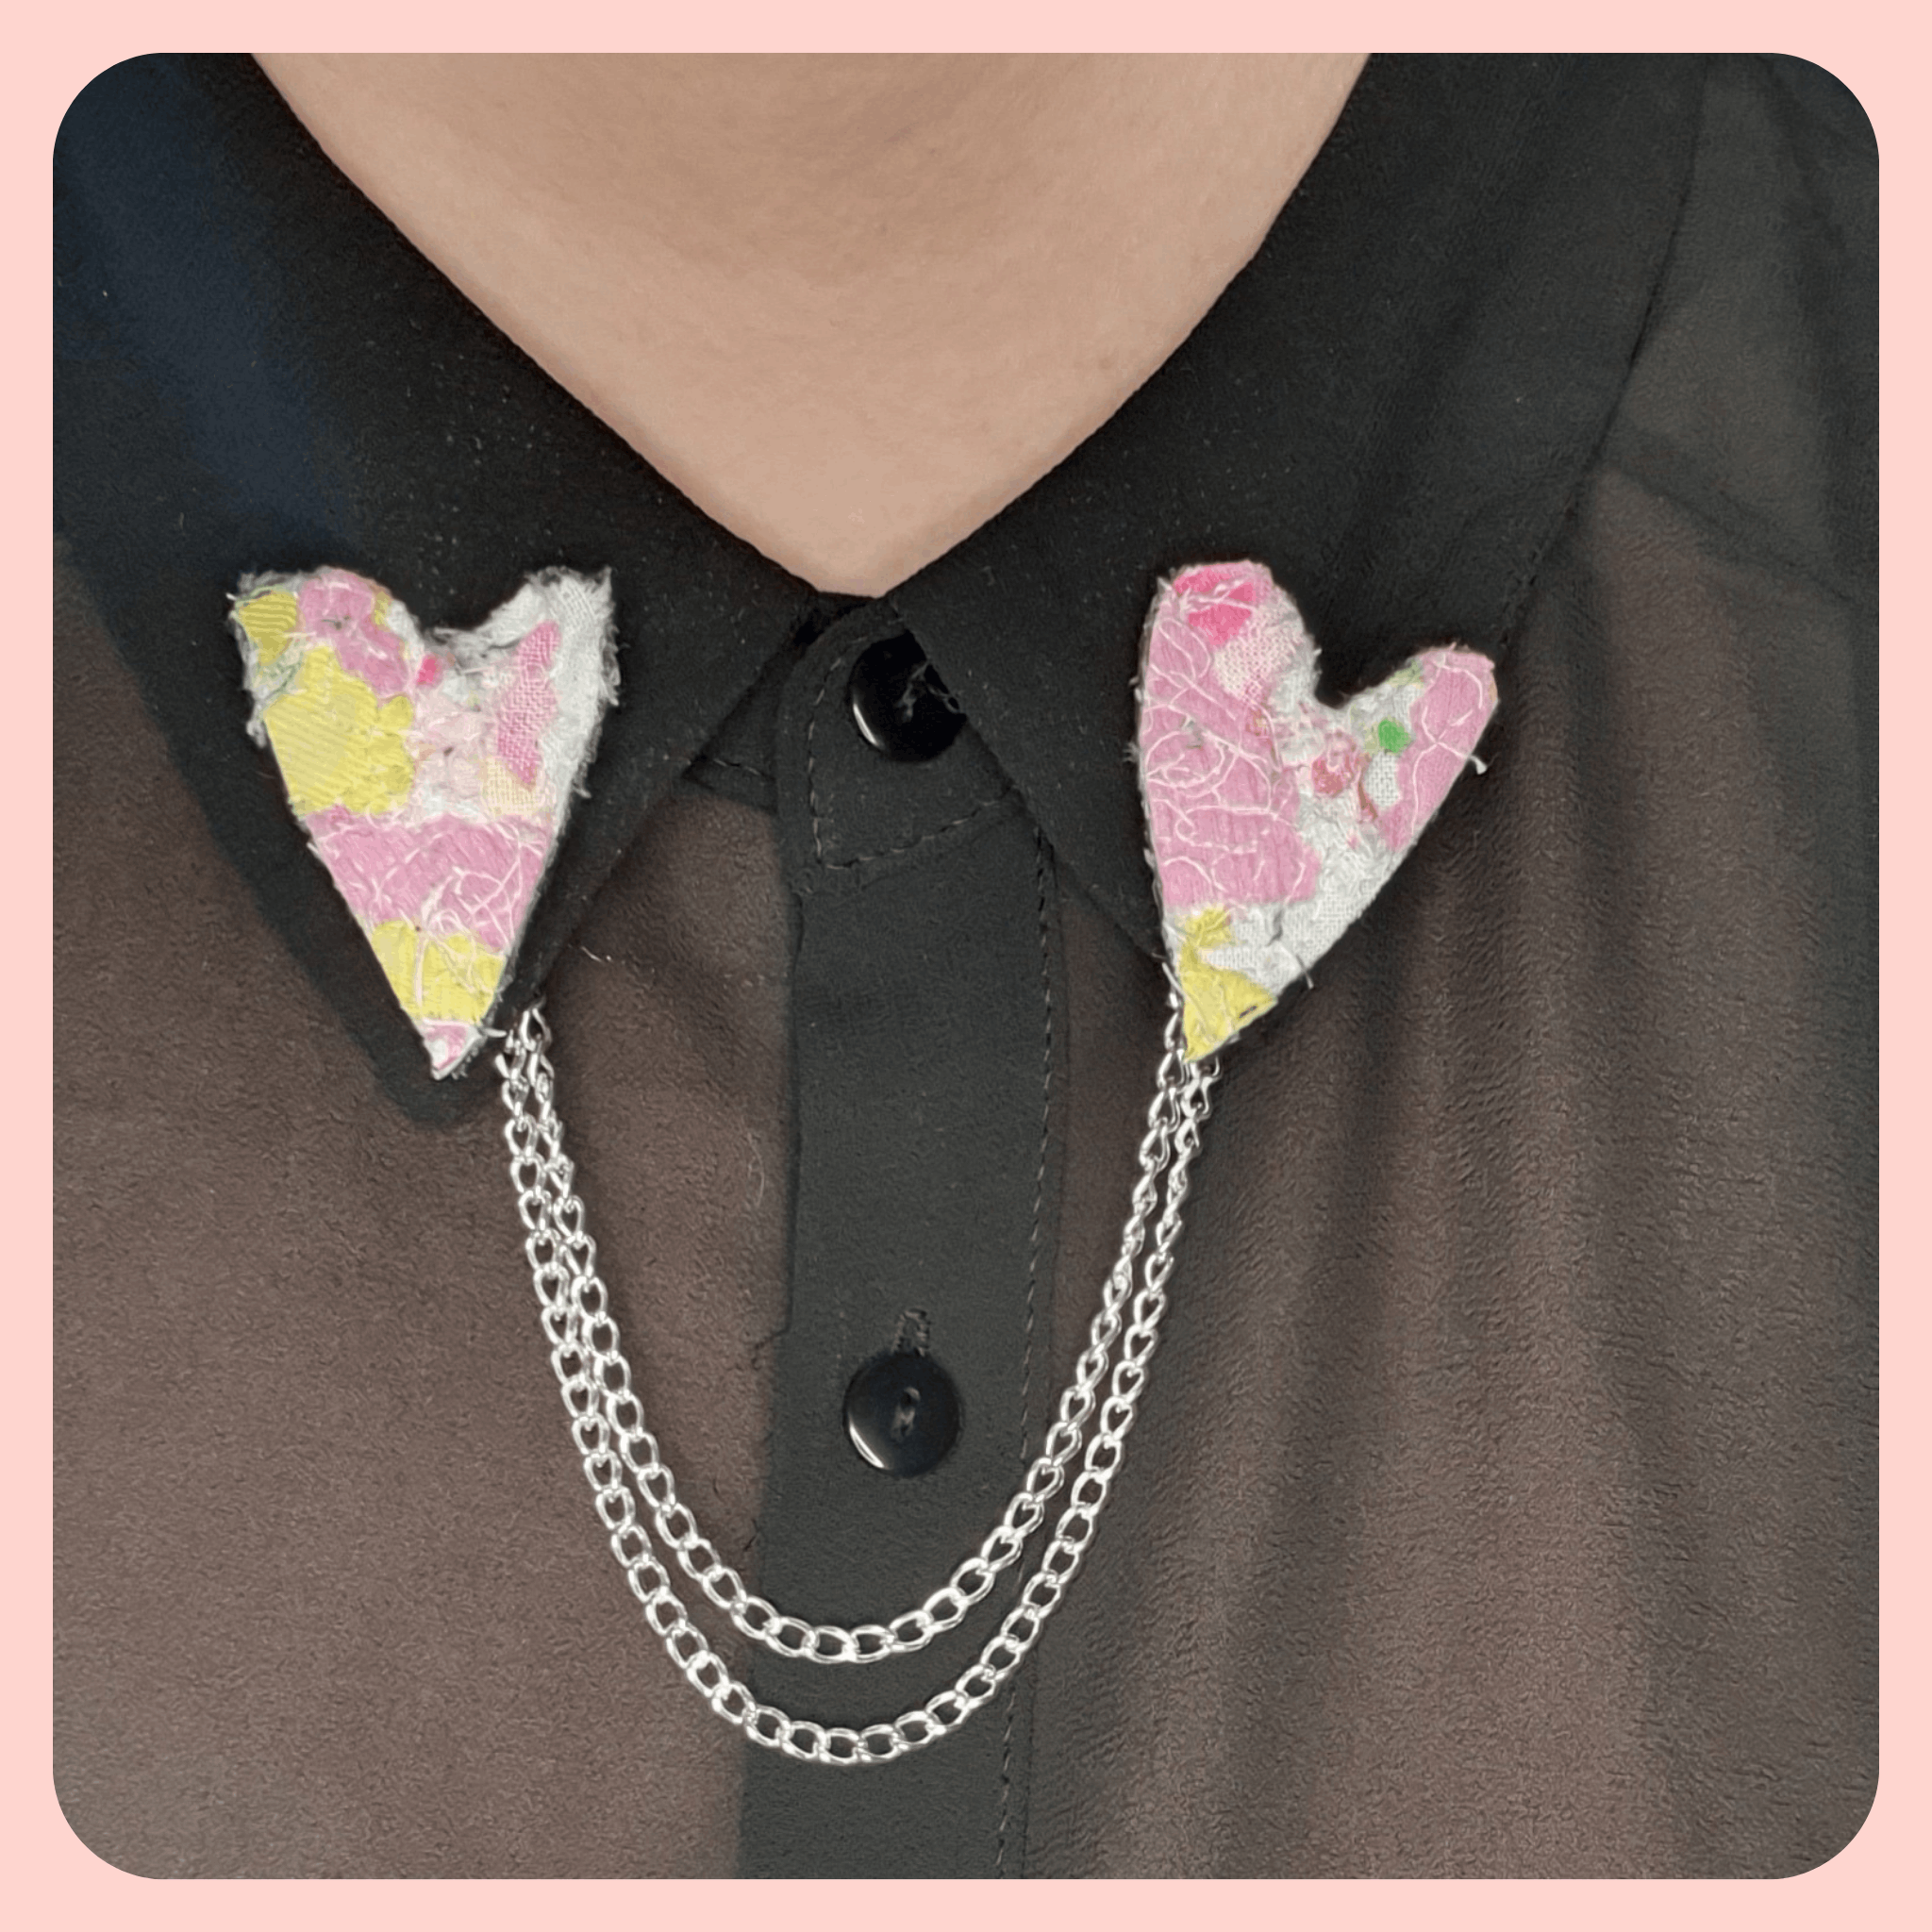 Pink and yellow collar pins worn on a black shirt